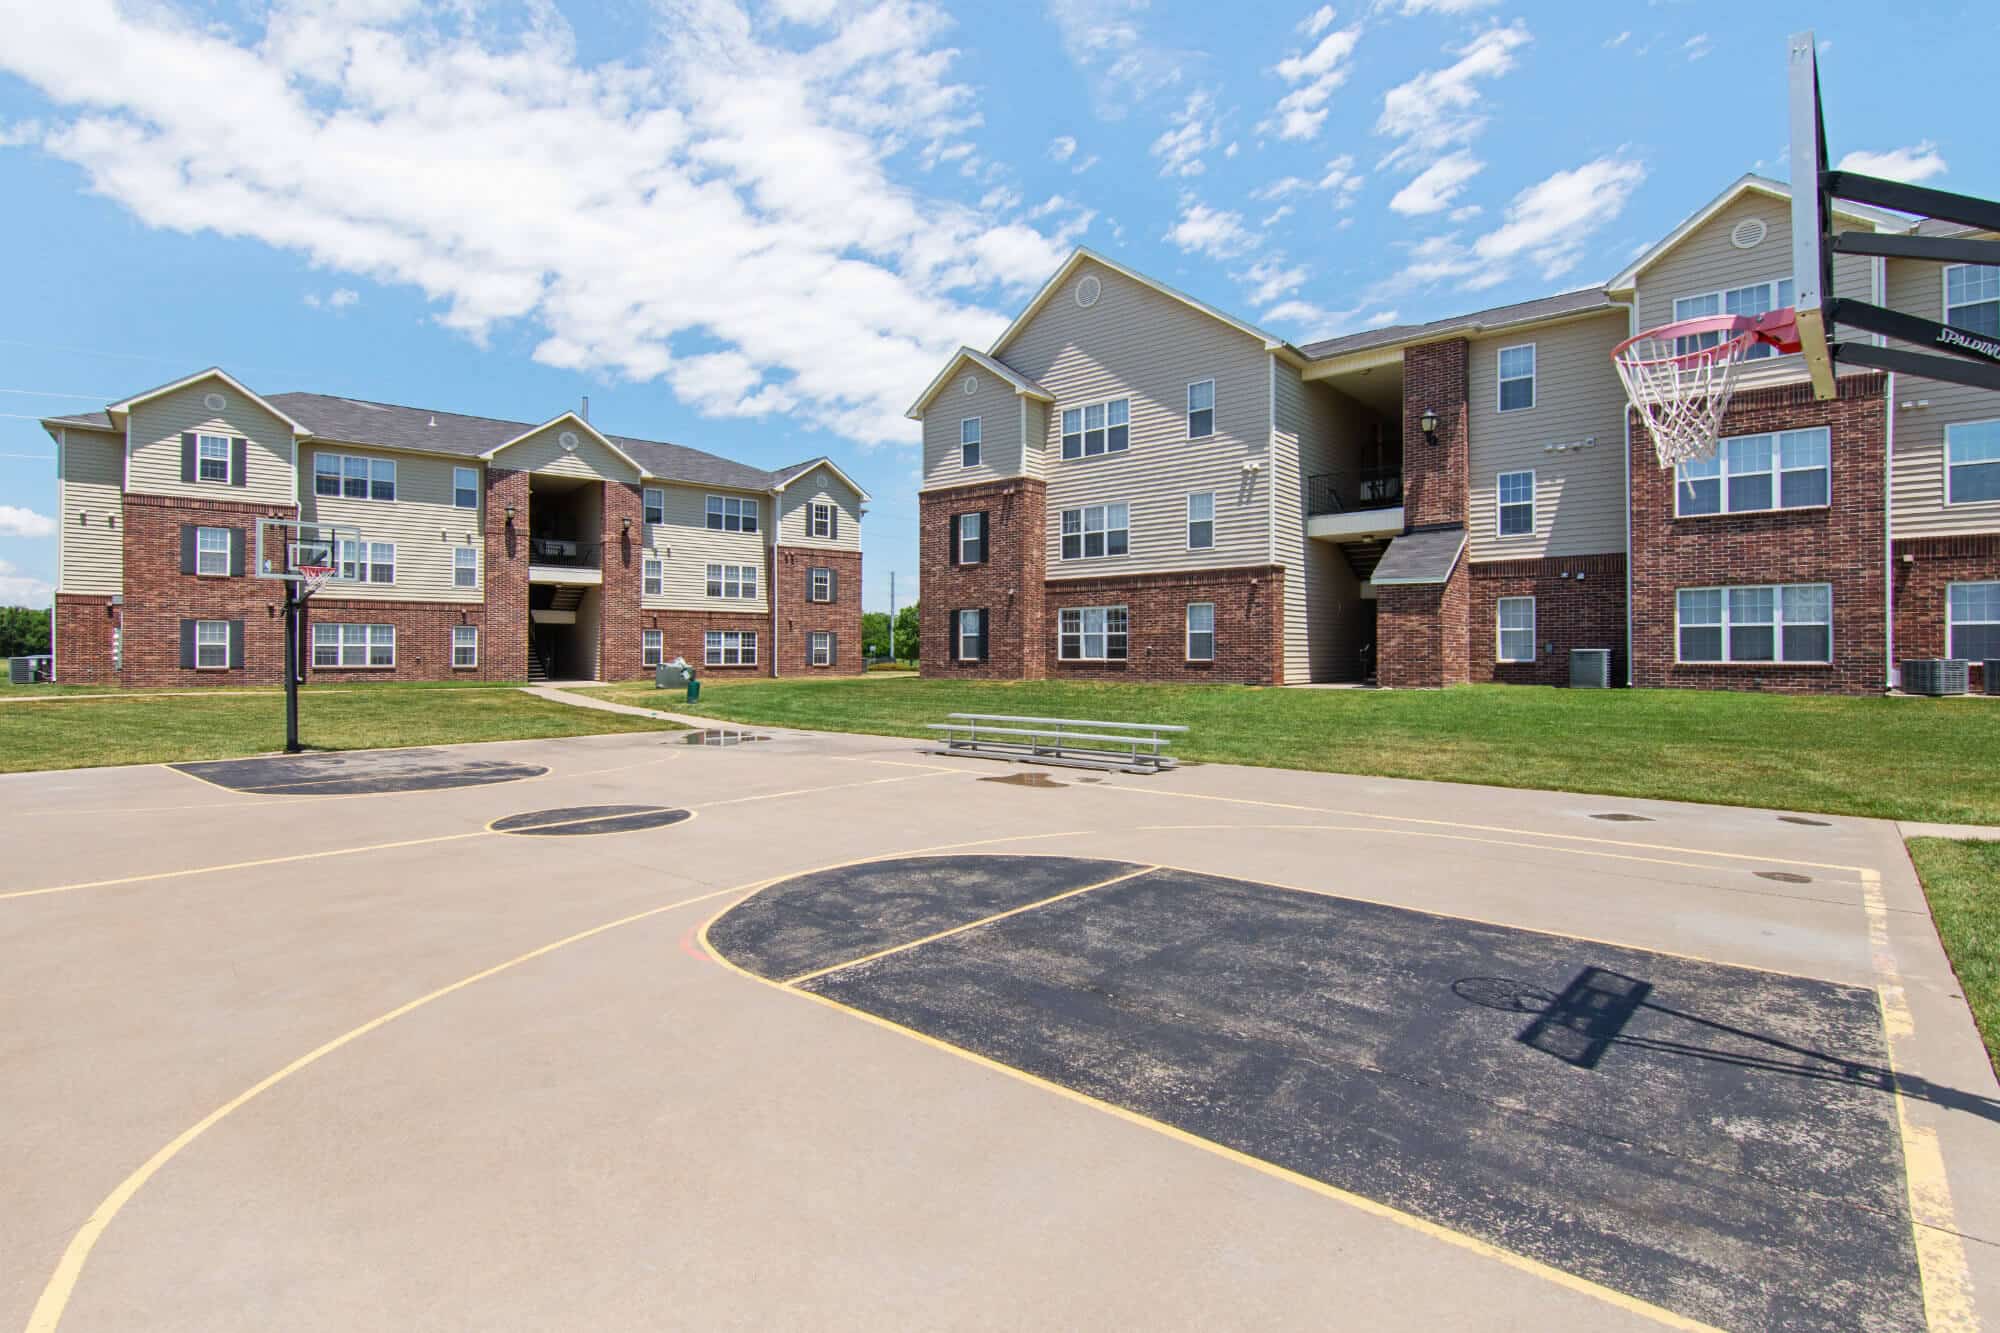 2909 oliver off campus apartments near wichita state university basketball court